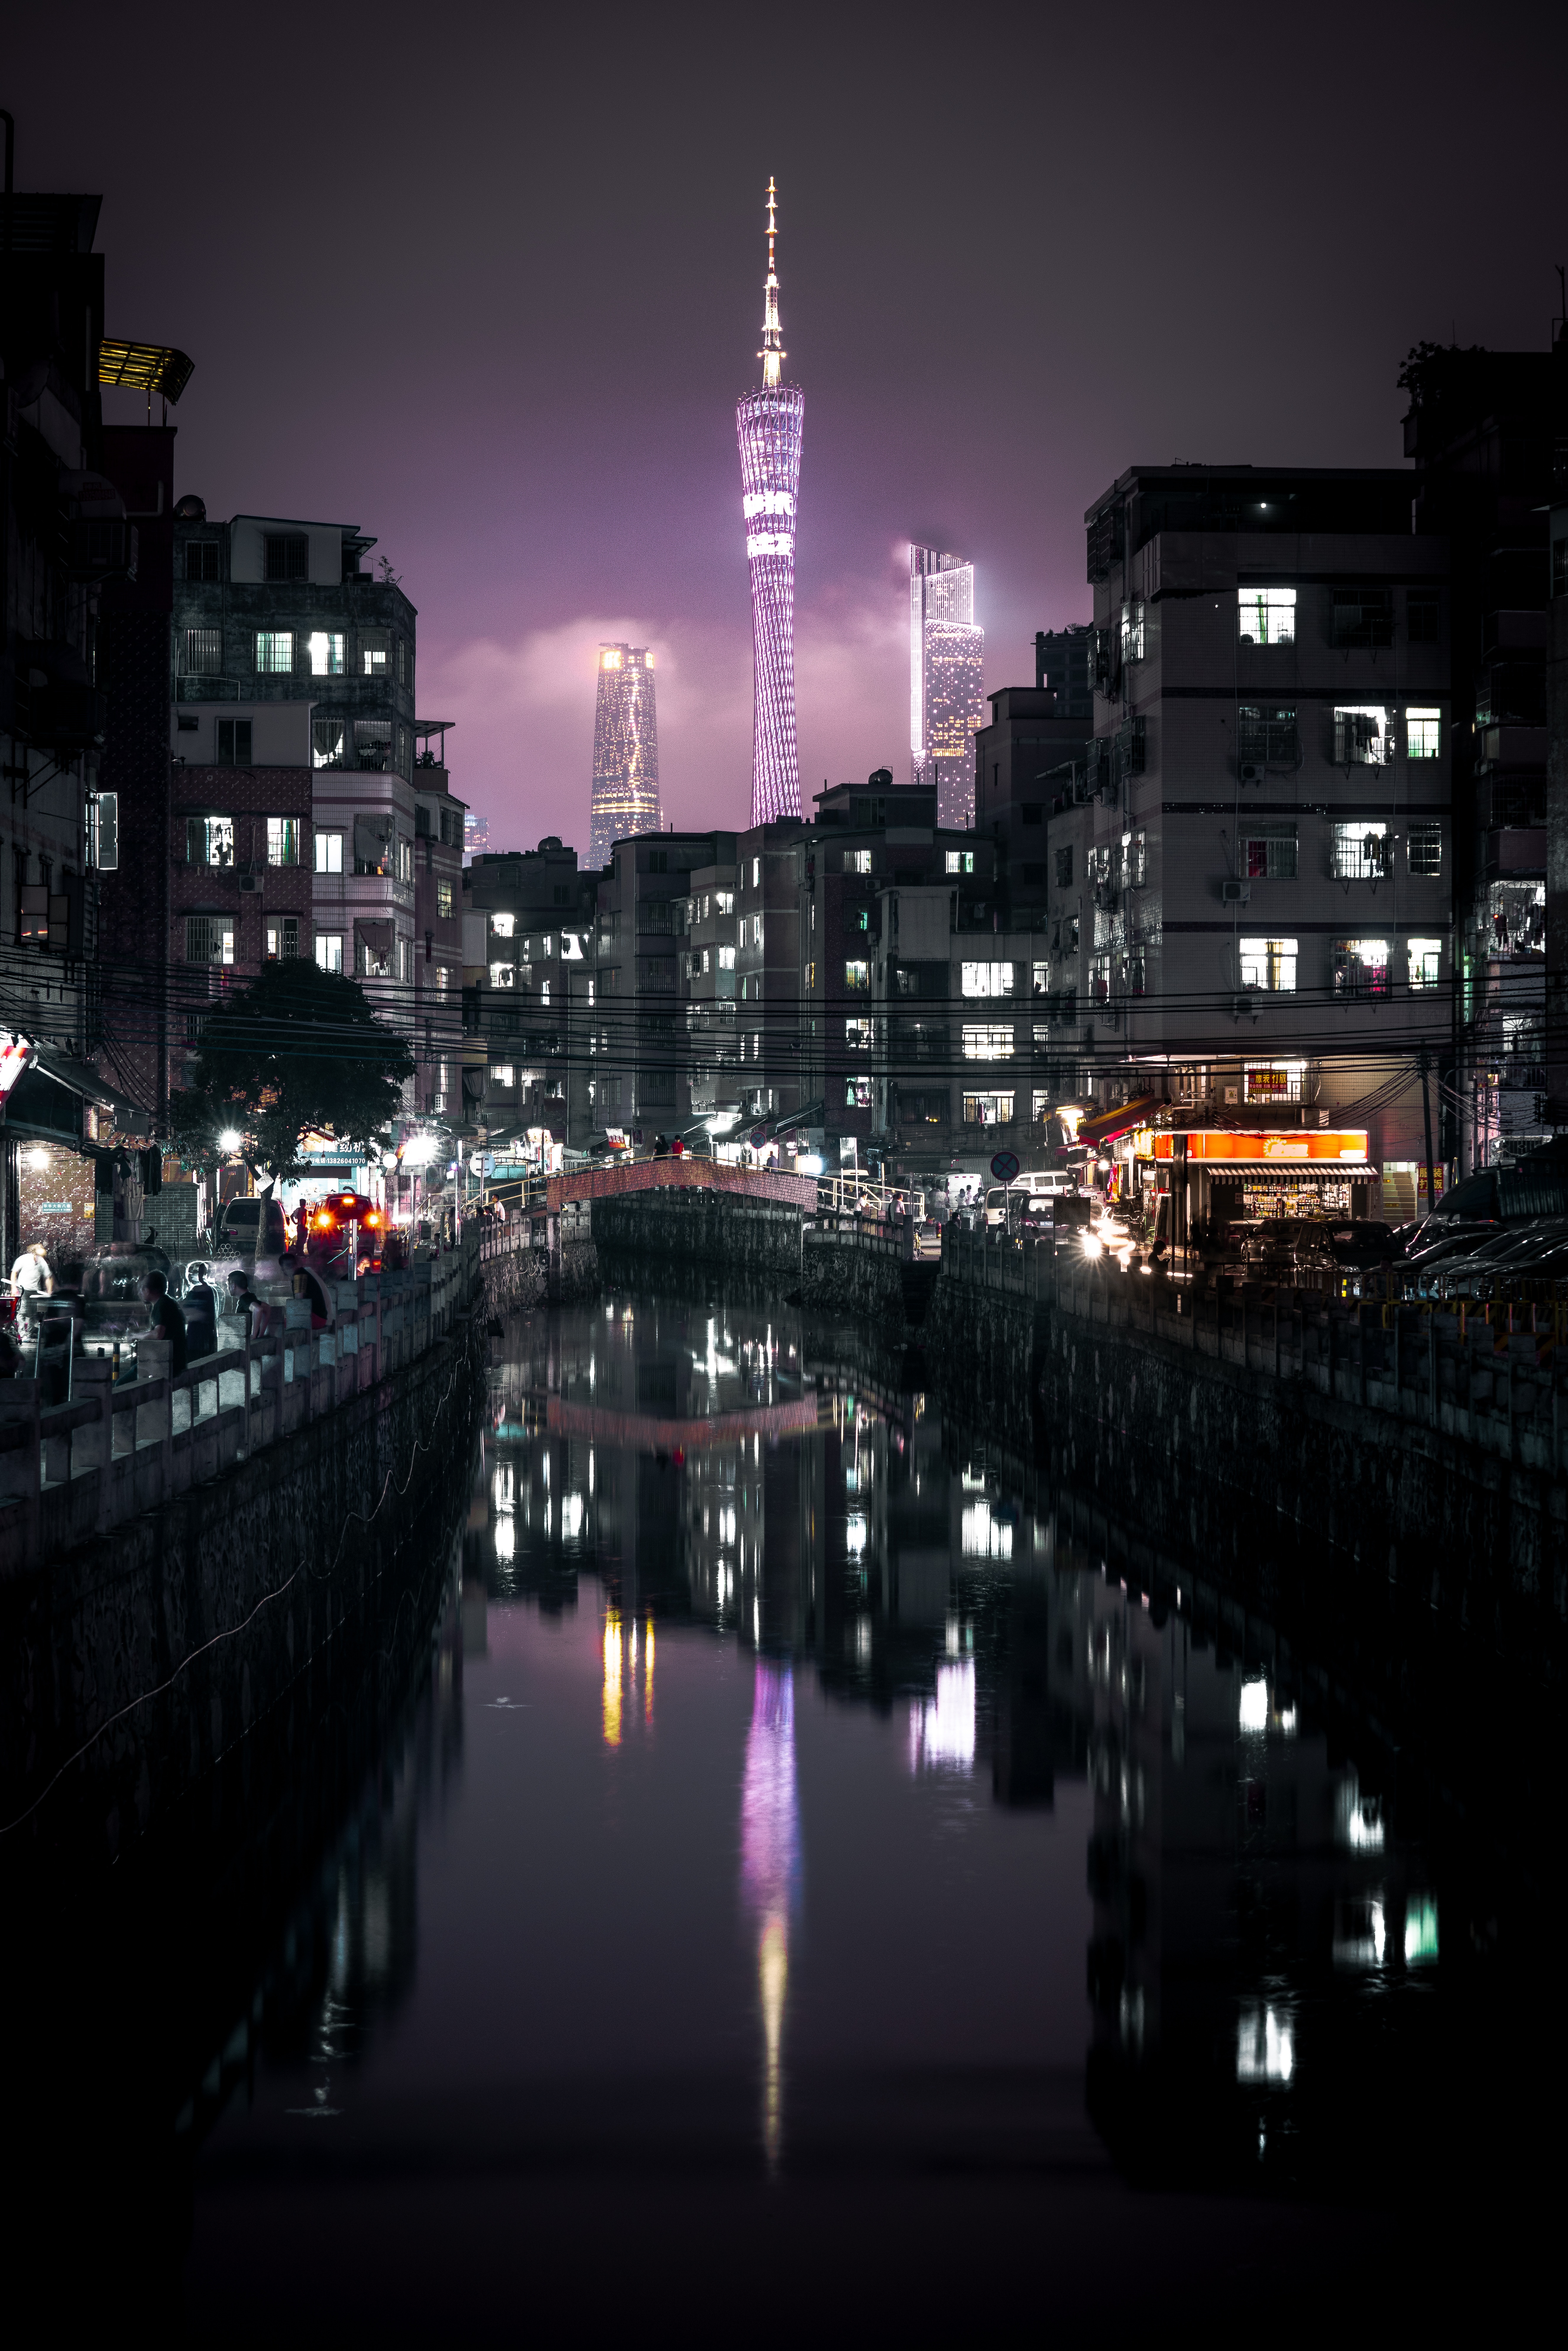 night city, reflection, quay, embankment, cities, lights, building, channel, architecture